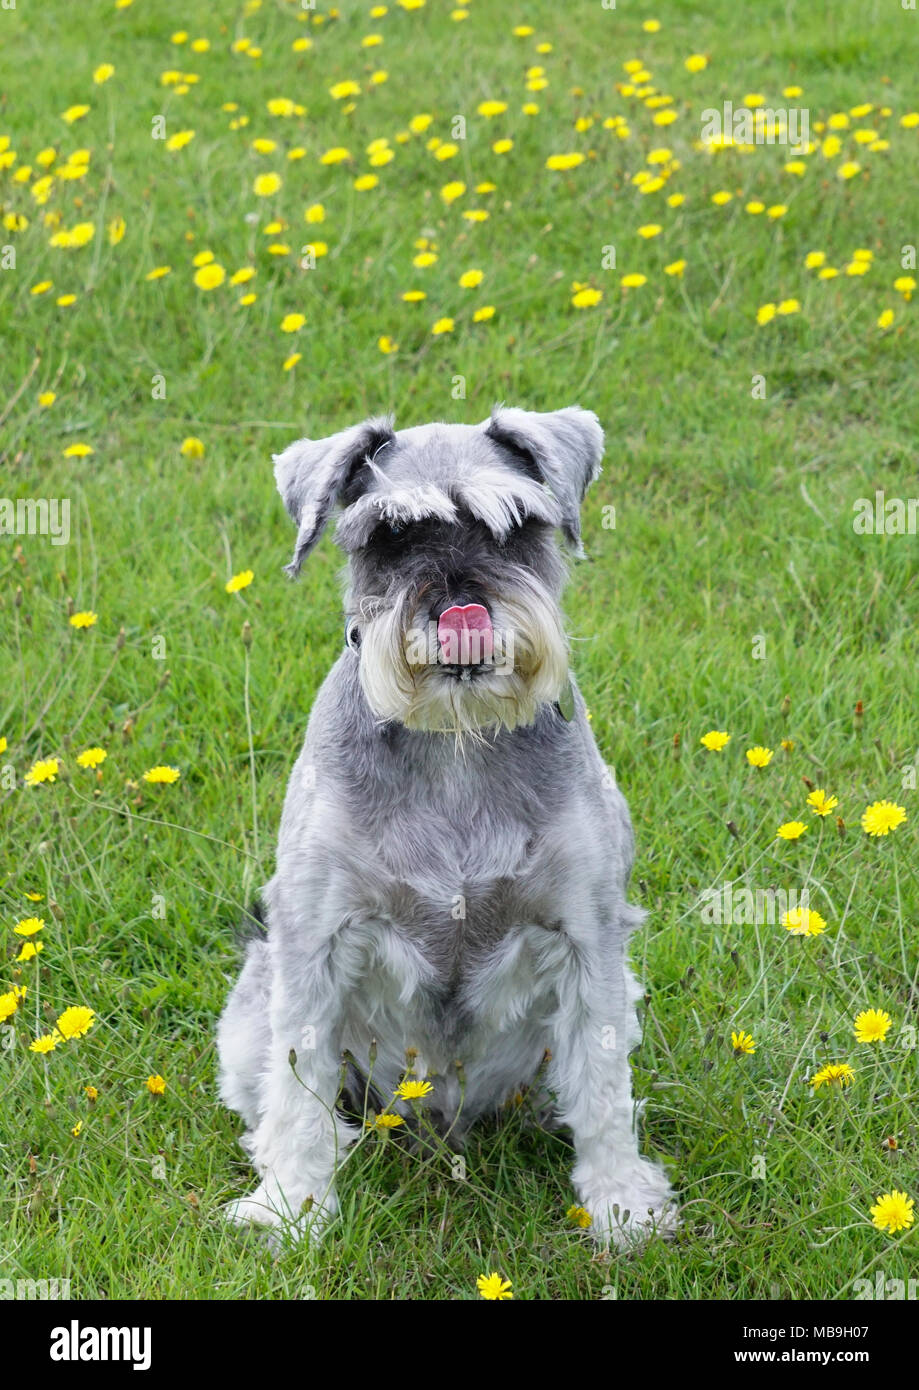 Frodo the Schnauzer dog with tongue licking his nose sitting in a field Stock Photo